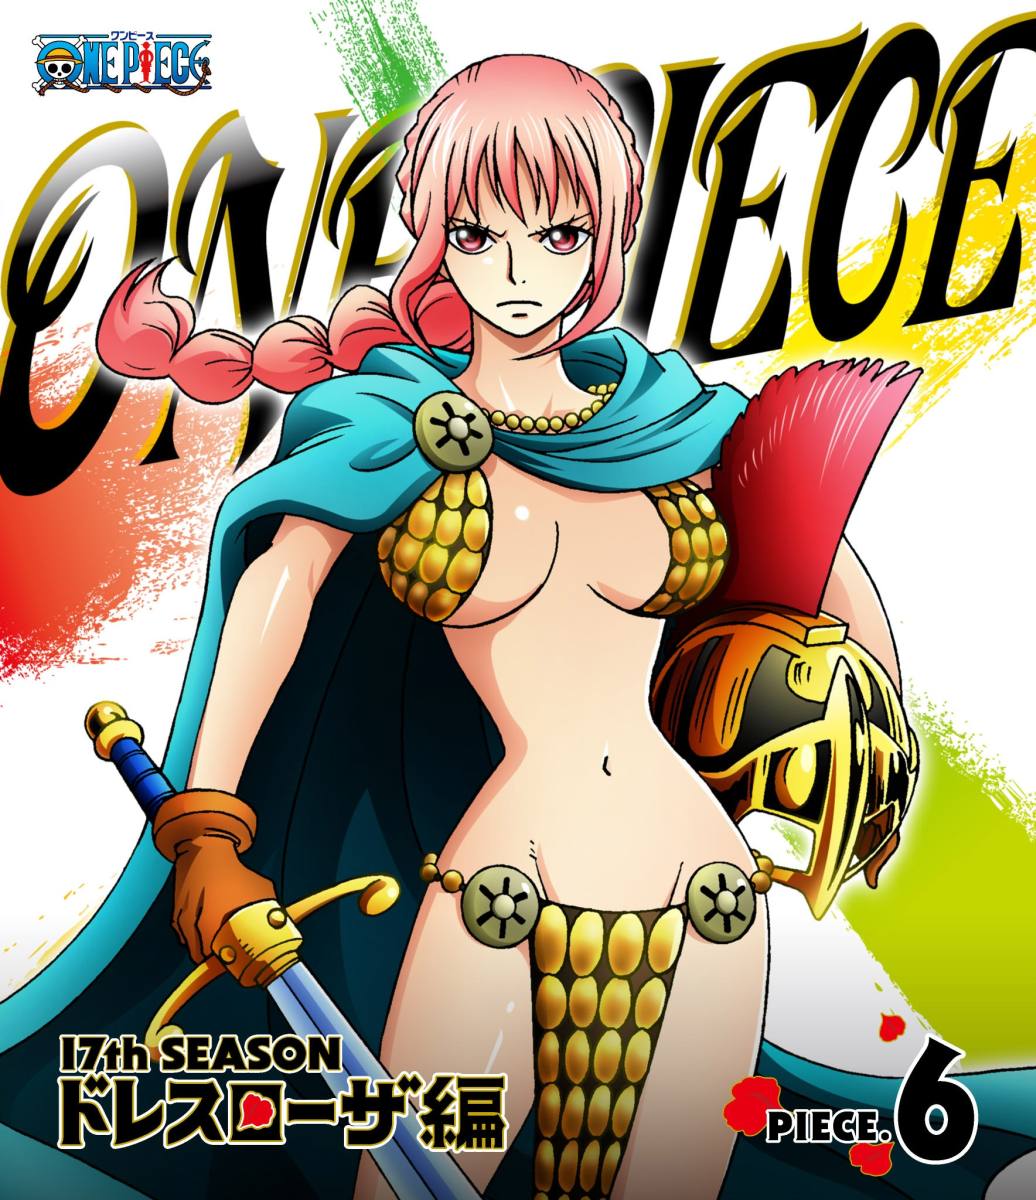 ONE PIECE ワンピース 17THシーズン ドレスローザ編 PIECE.6【Blu-ray】